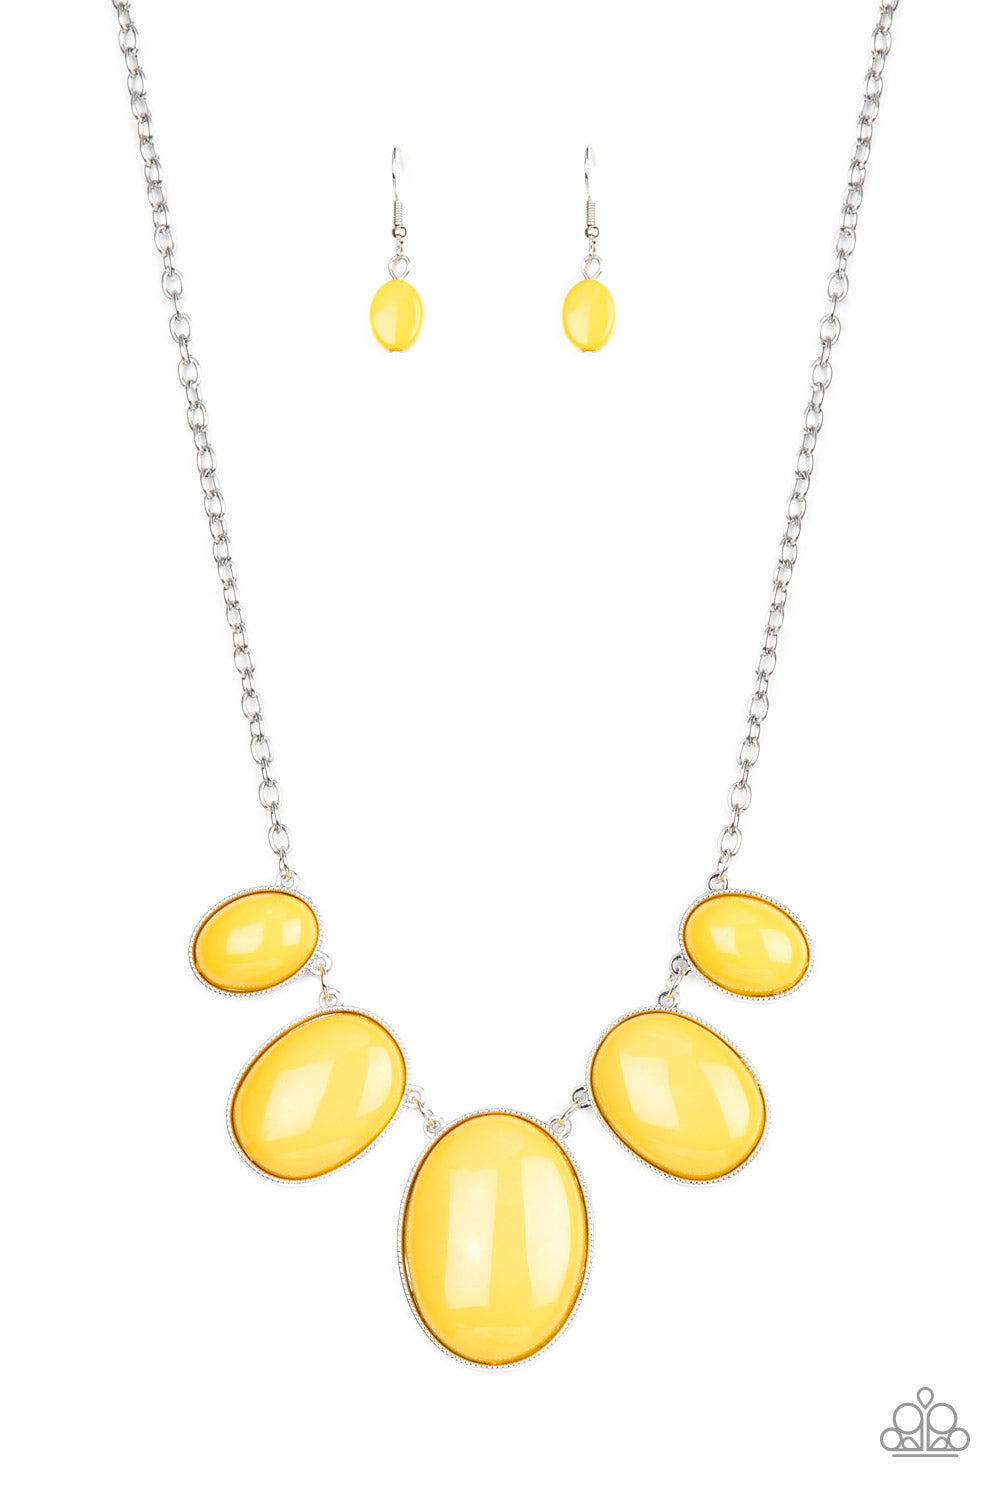 Vivacious Vanity Paparazzi Accessories Necklace with Earrings Yellow